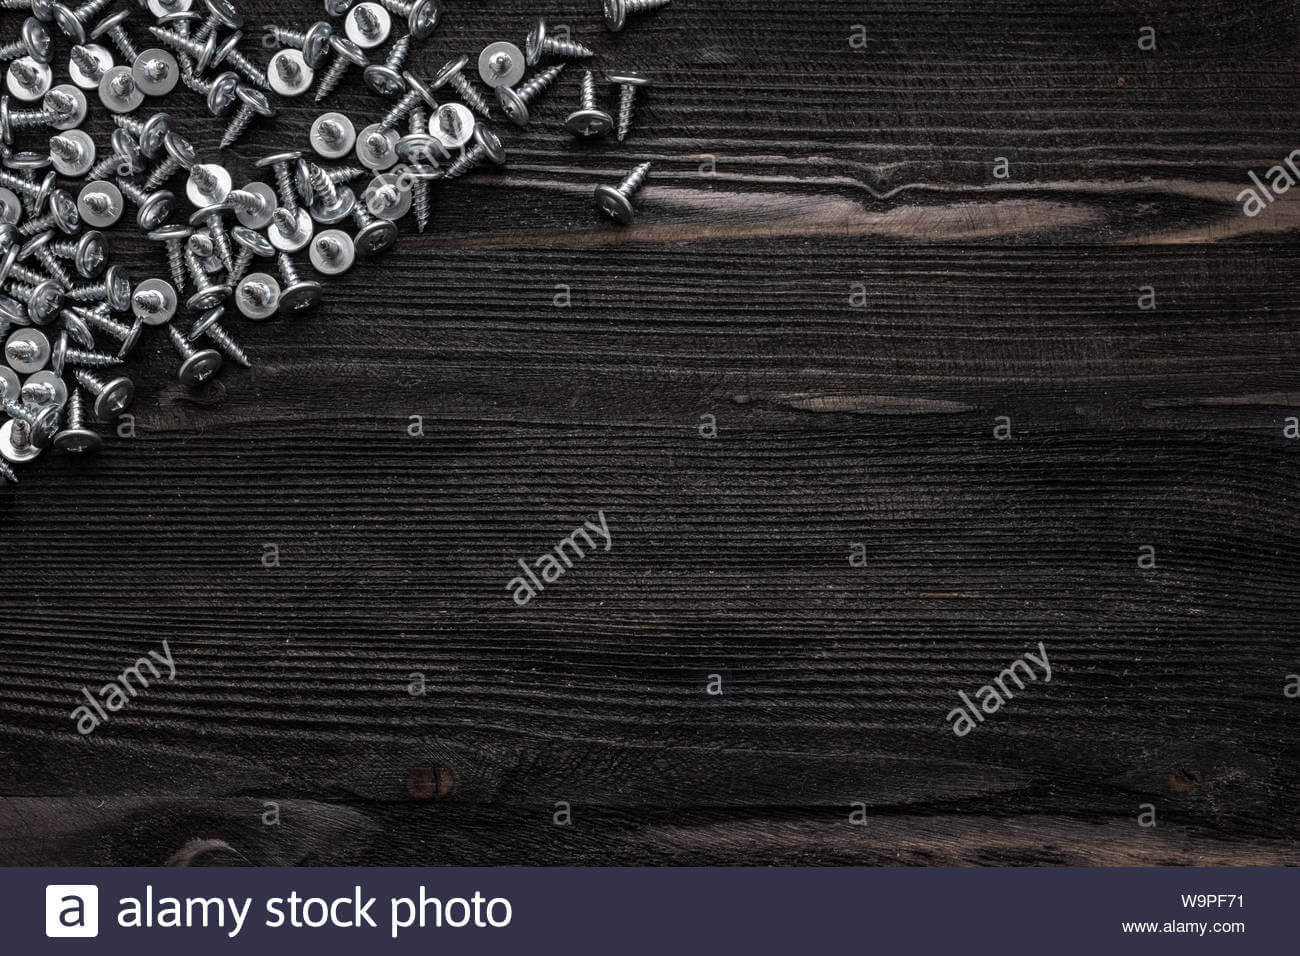 Some Wood Crews On Dark Wooden Desk Board Surface. Top View For Borderless Certificate Templates